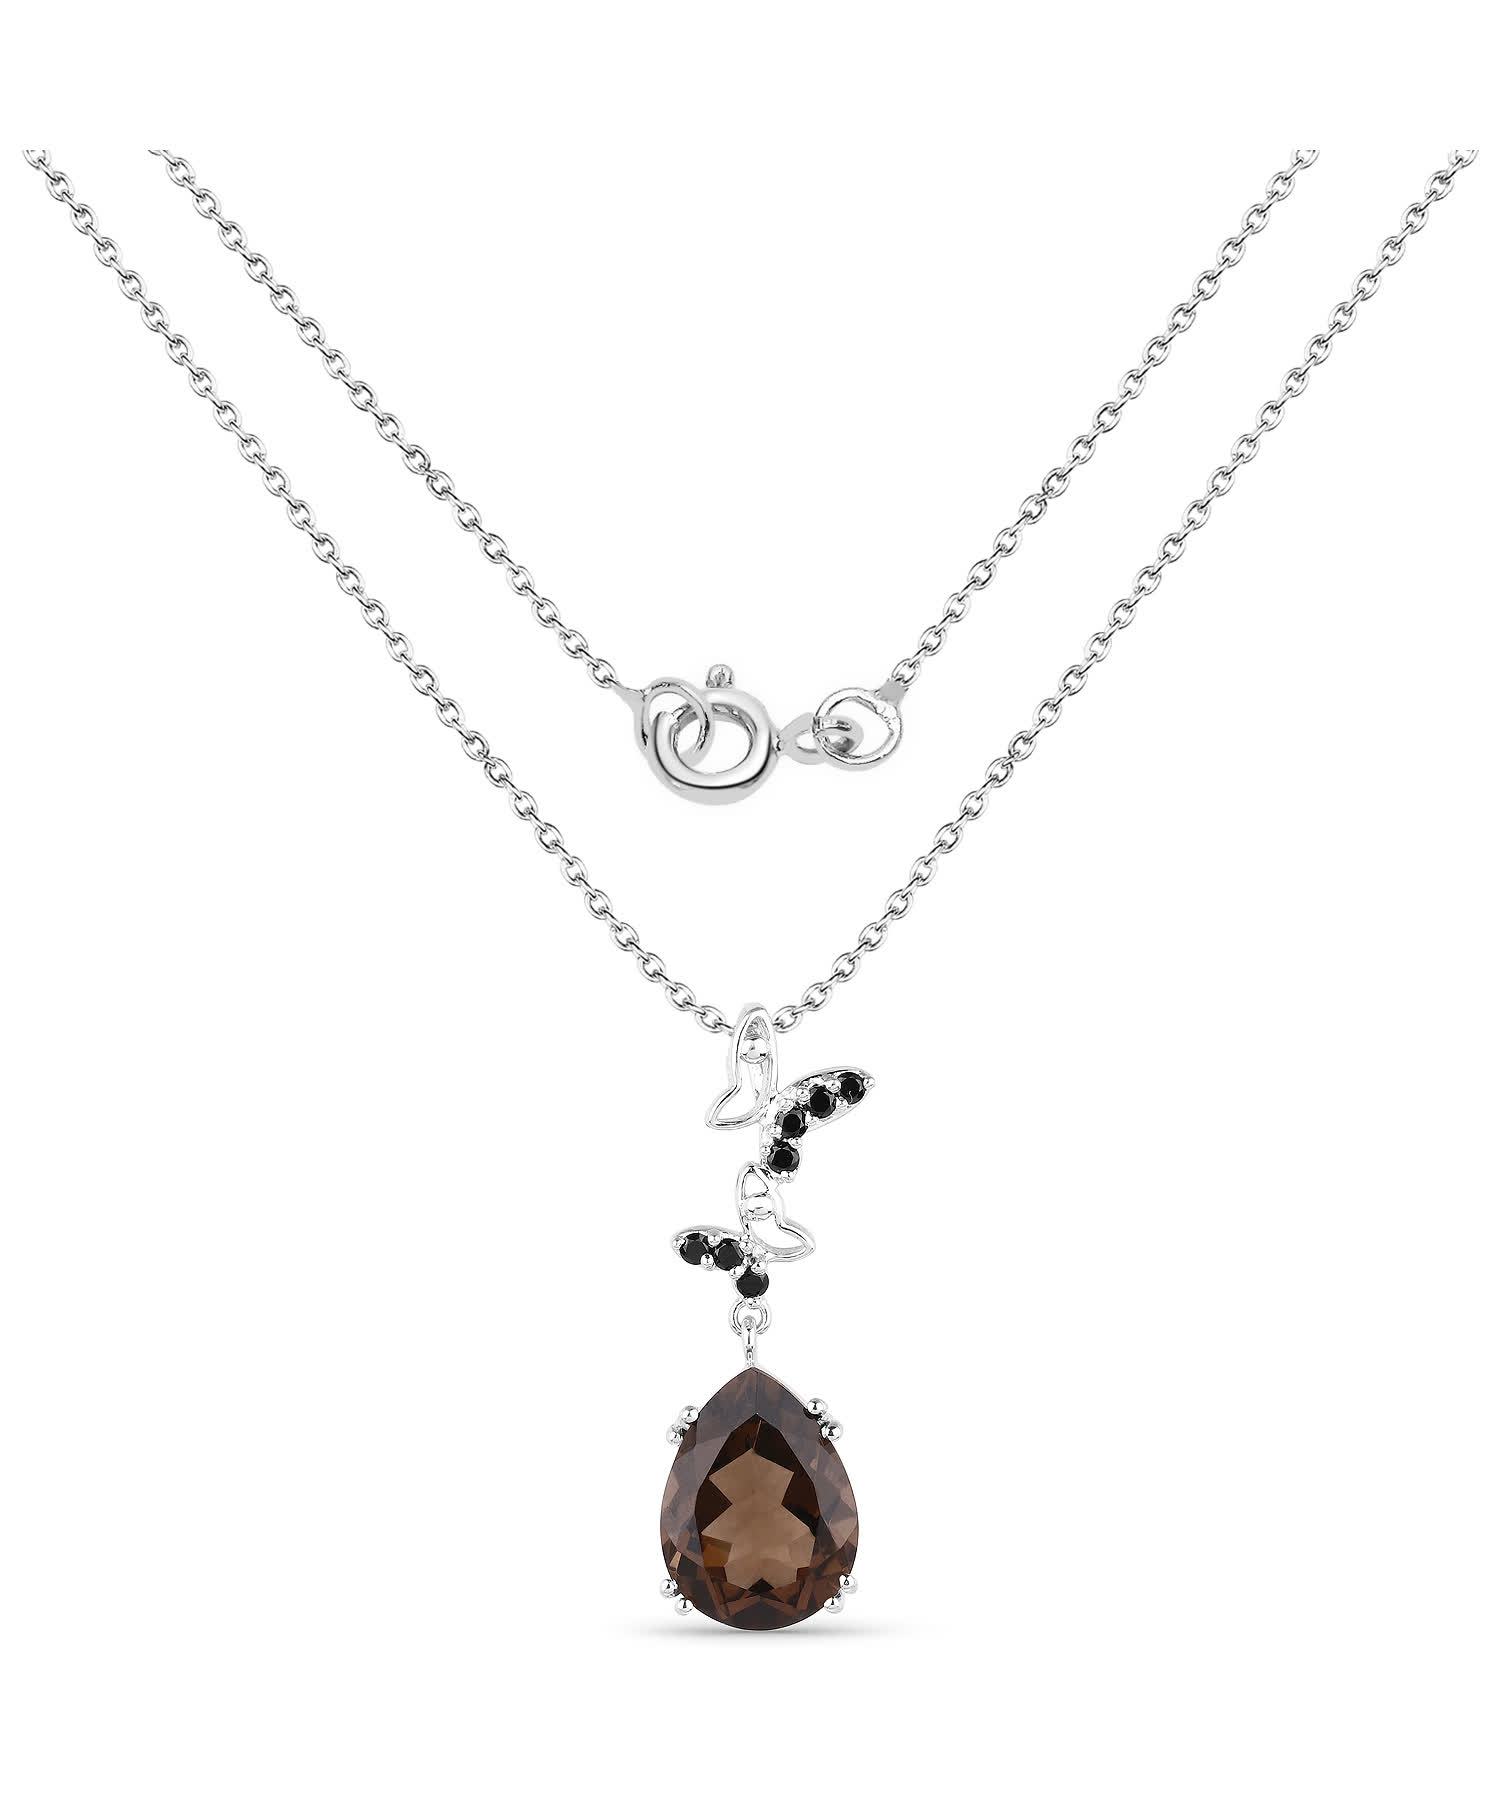 7.54ctw Natural Smoky Quartz and Black Spinel Rhodium Plated 925 Sterling Silver Drop Pendant With Chain View 2